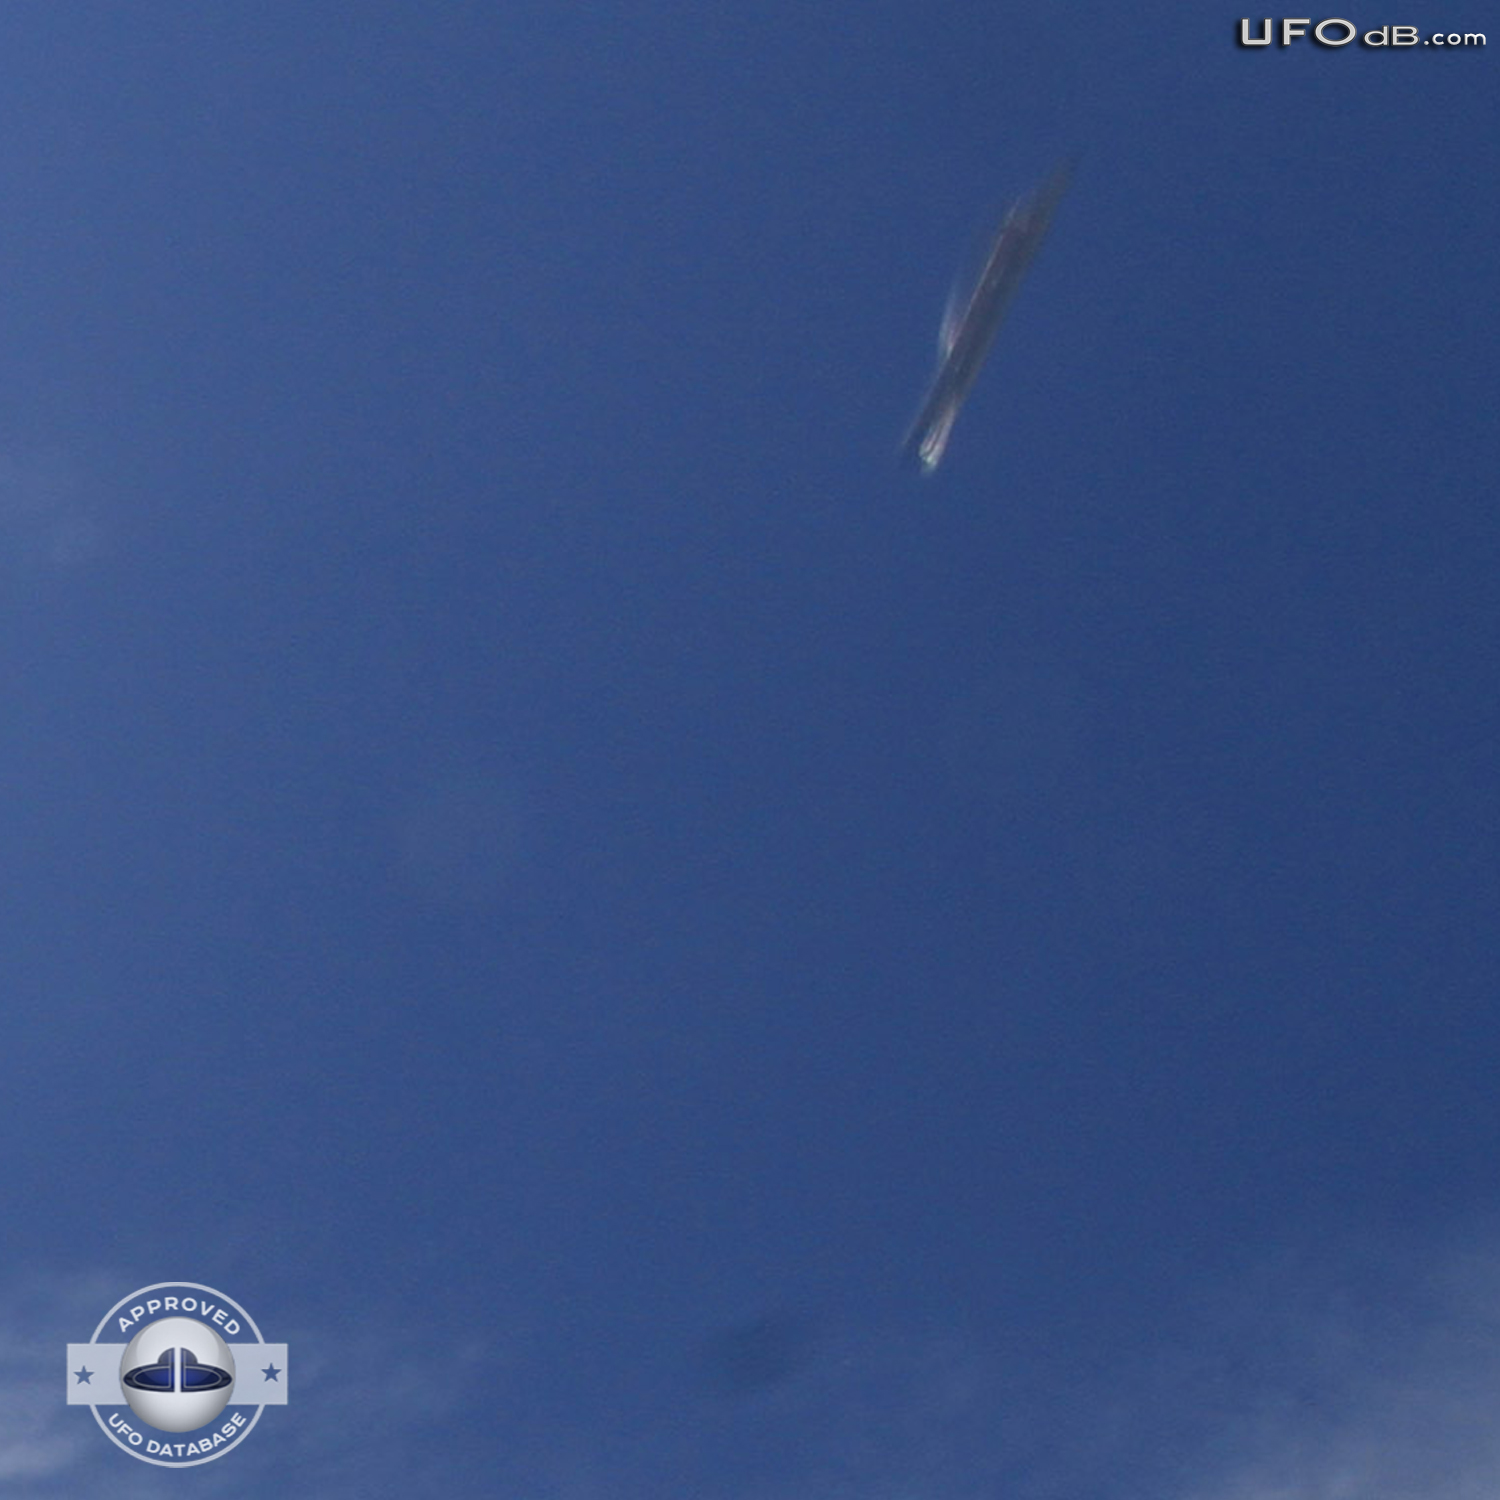 Incredibly Fast UFO caught on picture in Michigan, USA | May 24 2011 UFO Picture #326-2